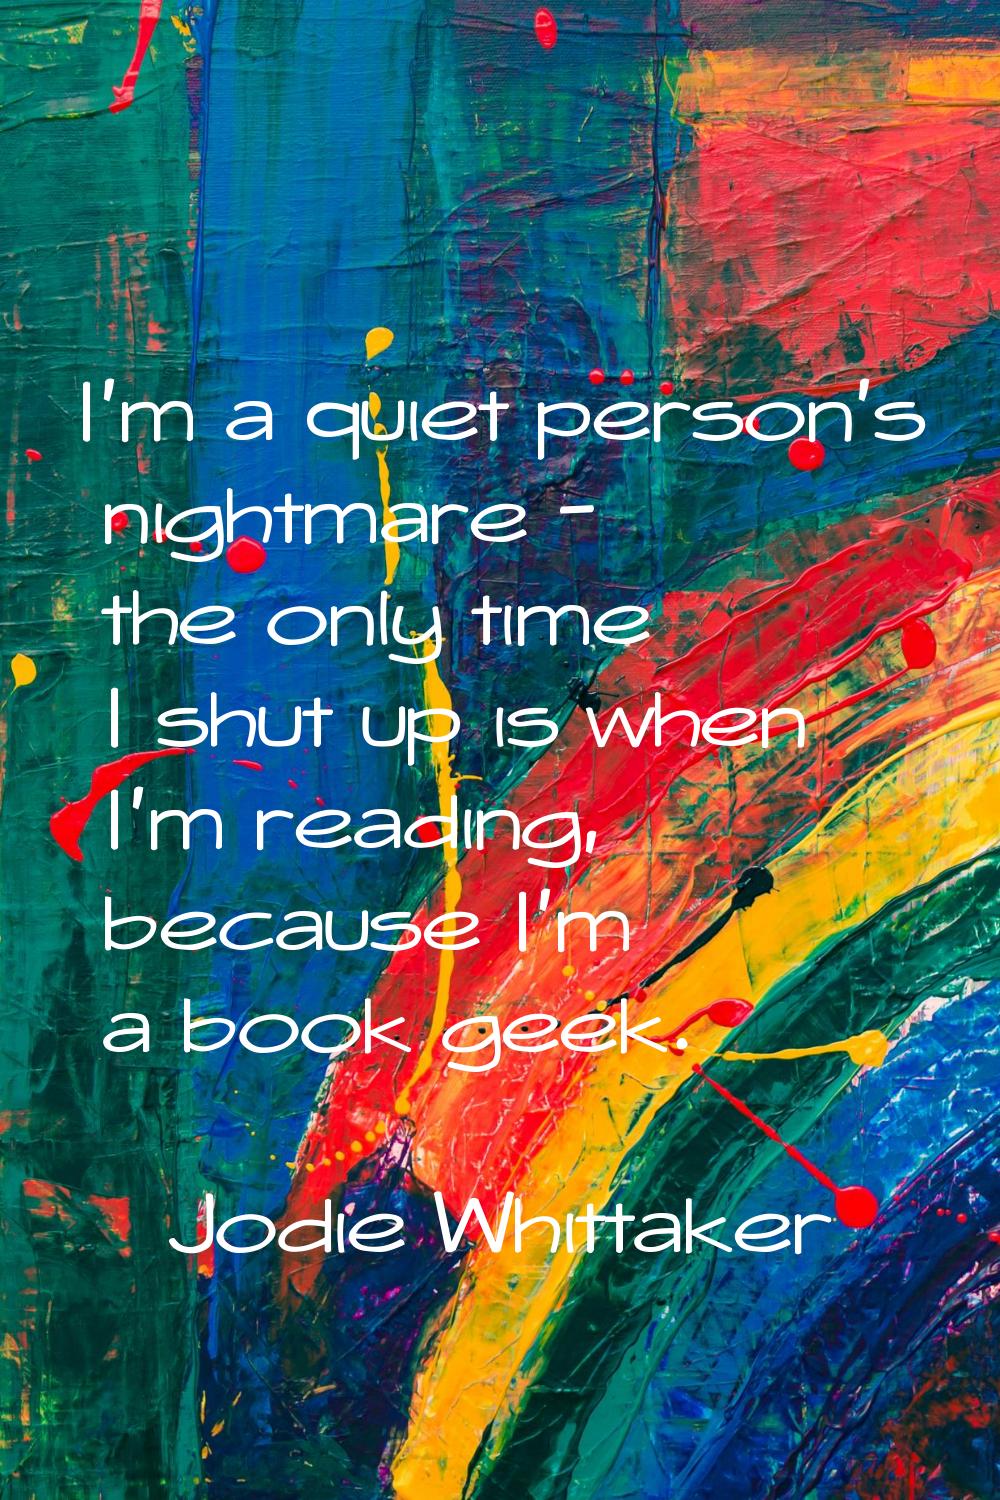 I'm a quiet person's nightmare - the only time I shut up is when I'm reading, because I'm a book ge